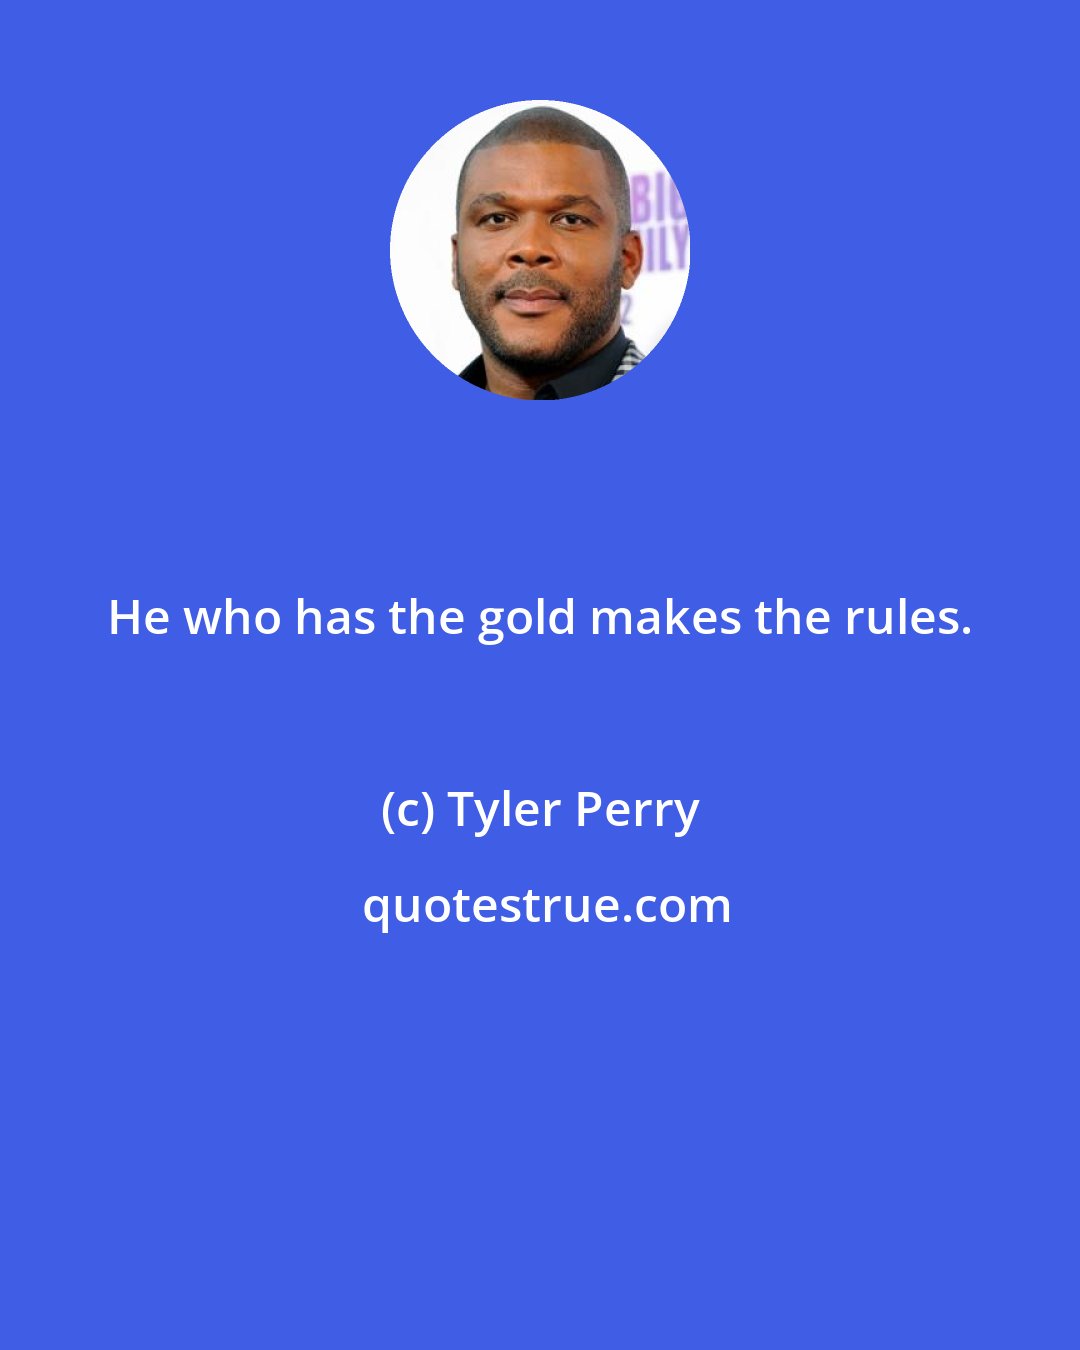 Tyler Perry: He who has the gold makes the rules.